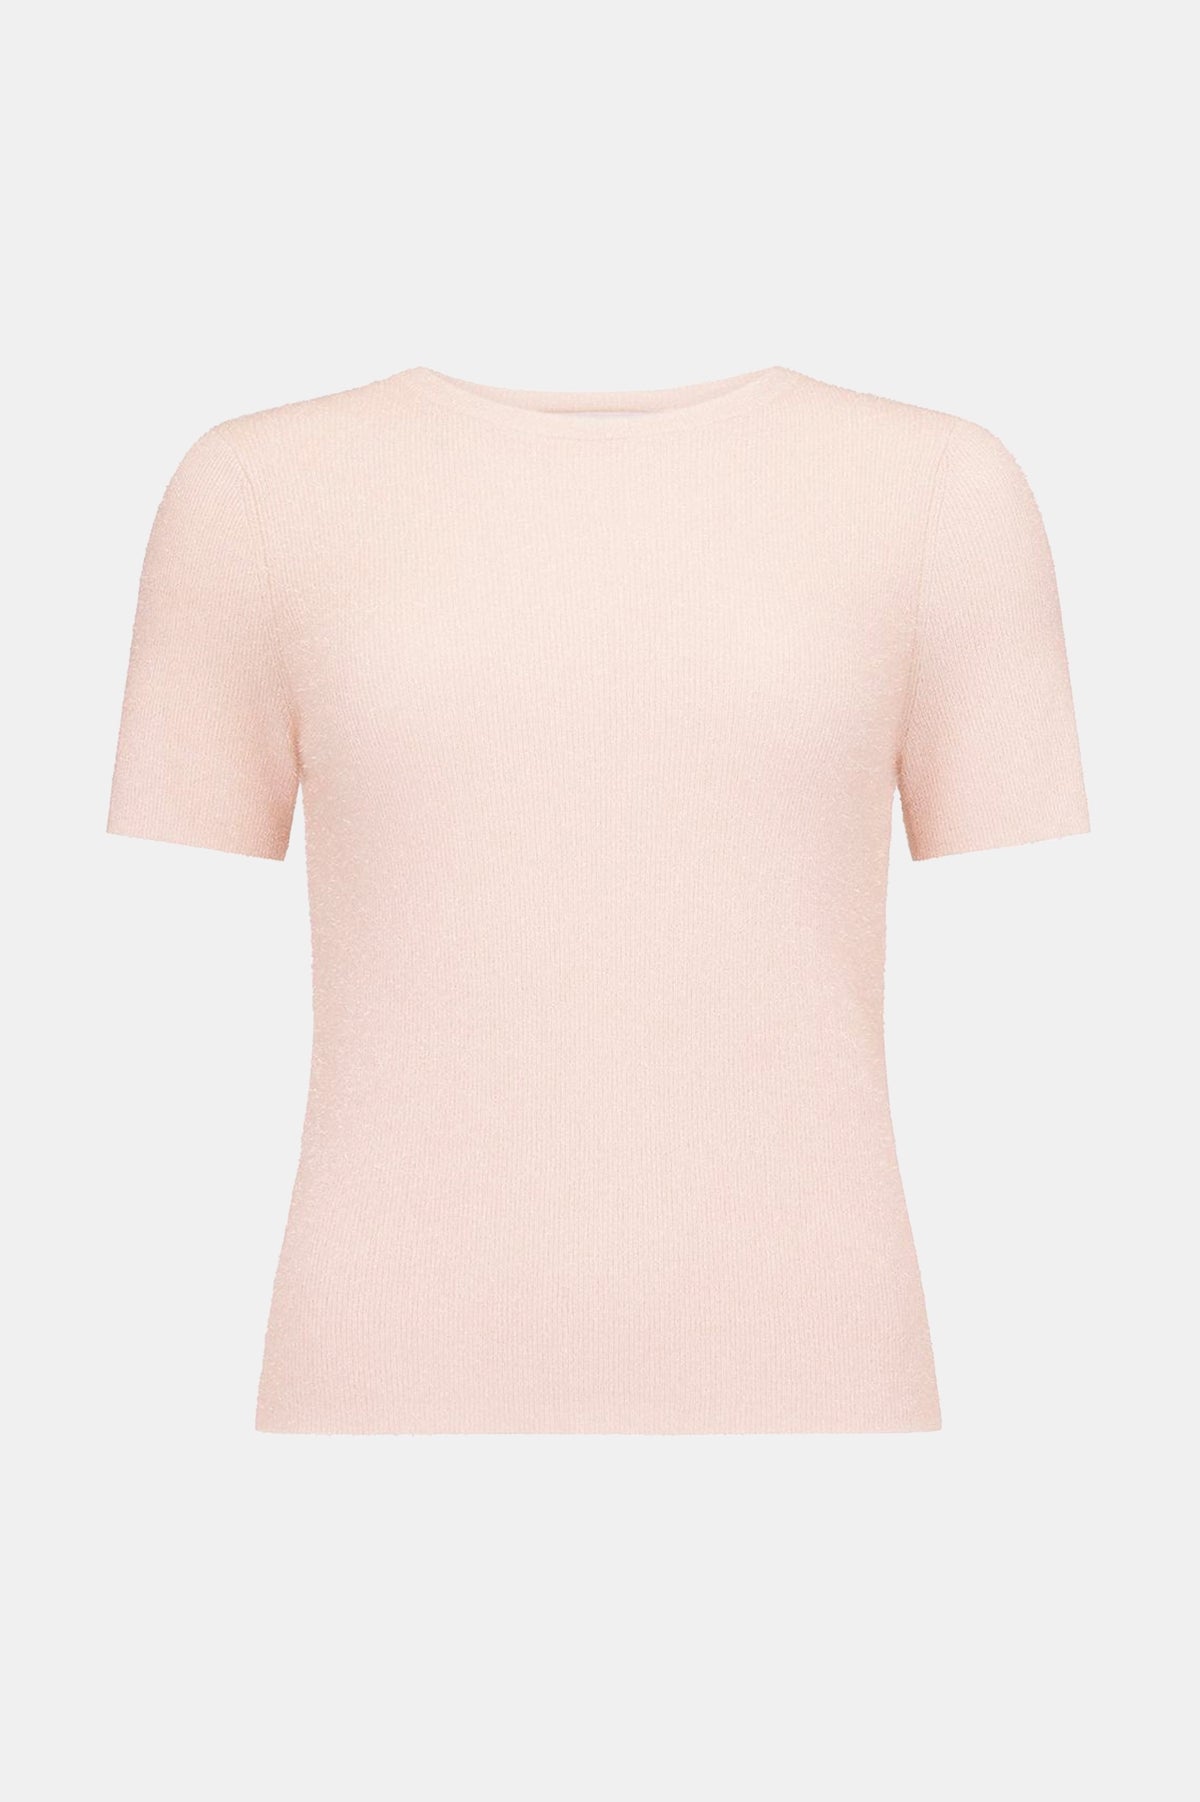 Osa Tee in Powder Pink